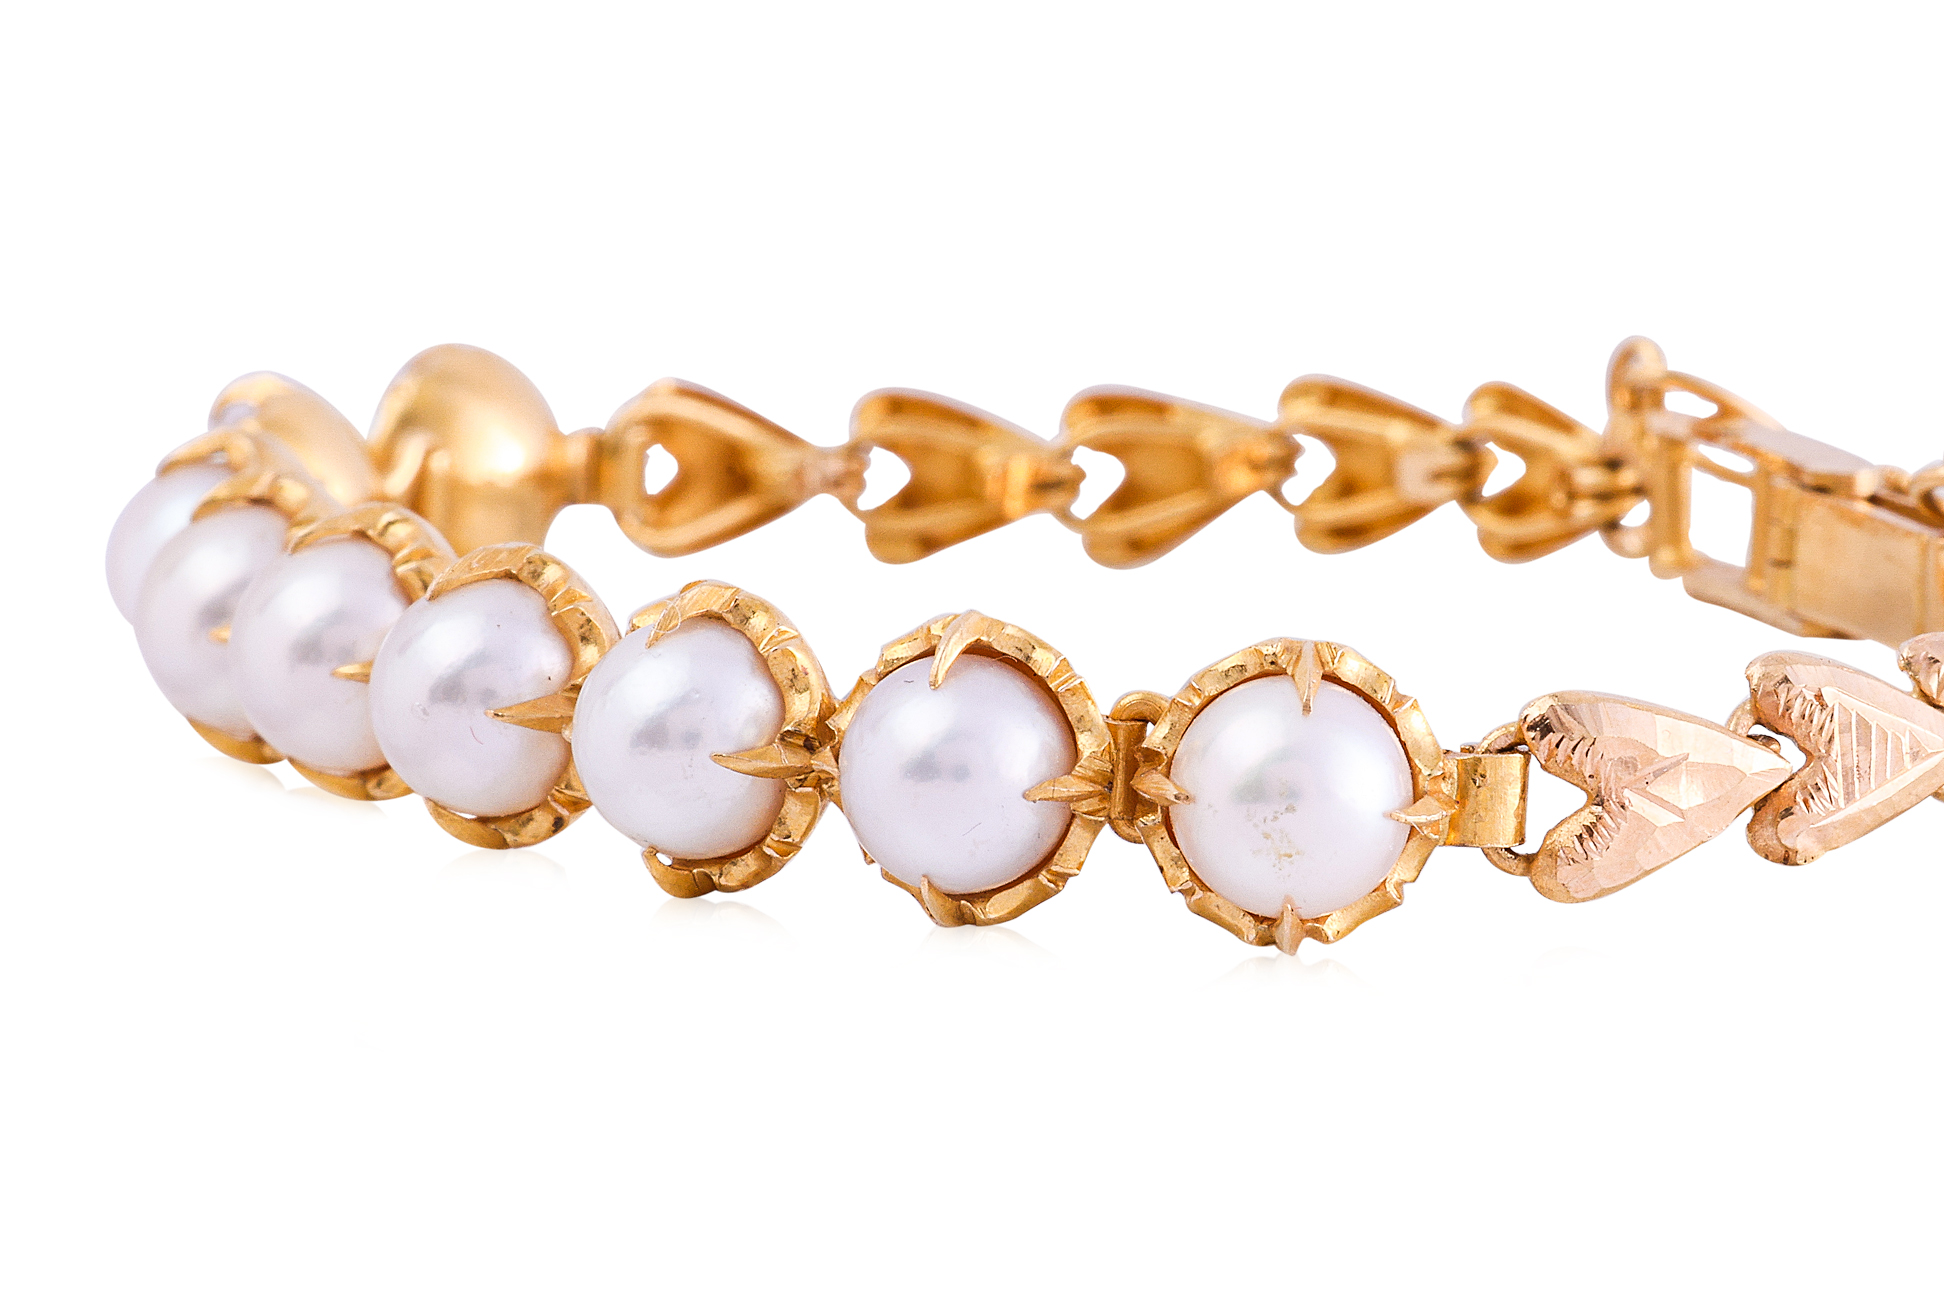 A CULTURED AKOYA PEARL BRACELET - Image 3 of 3